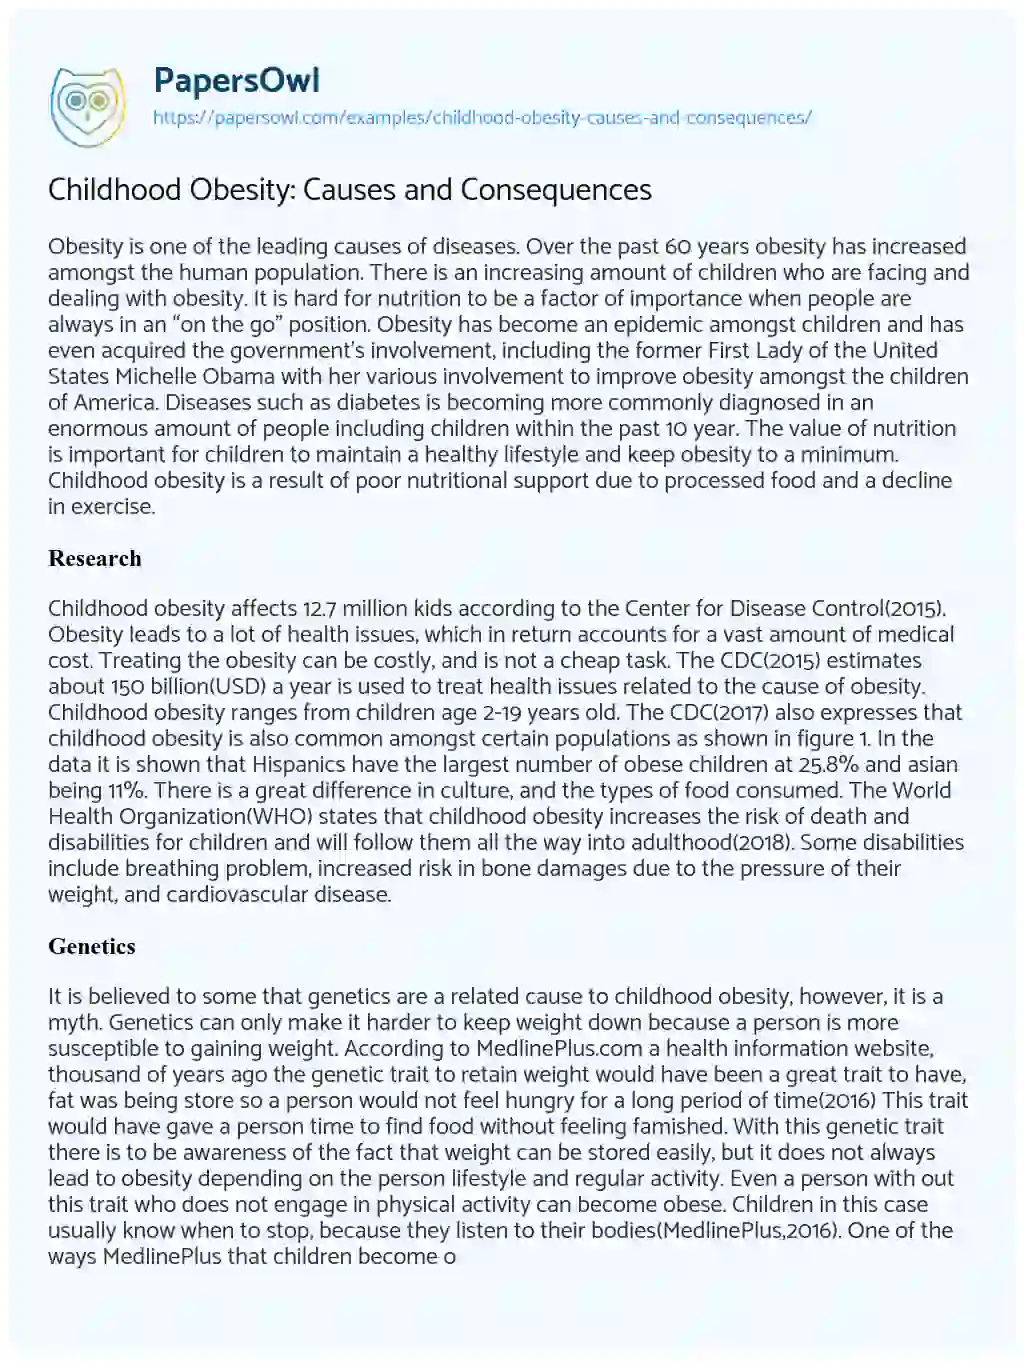 Essay on Childhood Obesity: Causes and Consequences